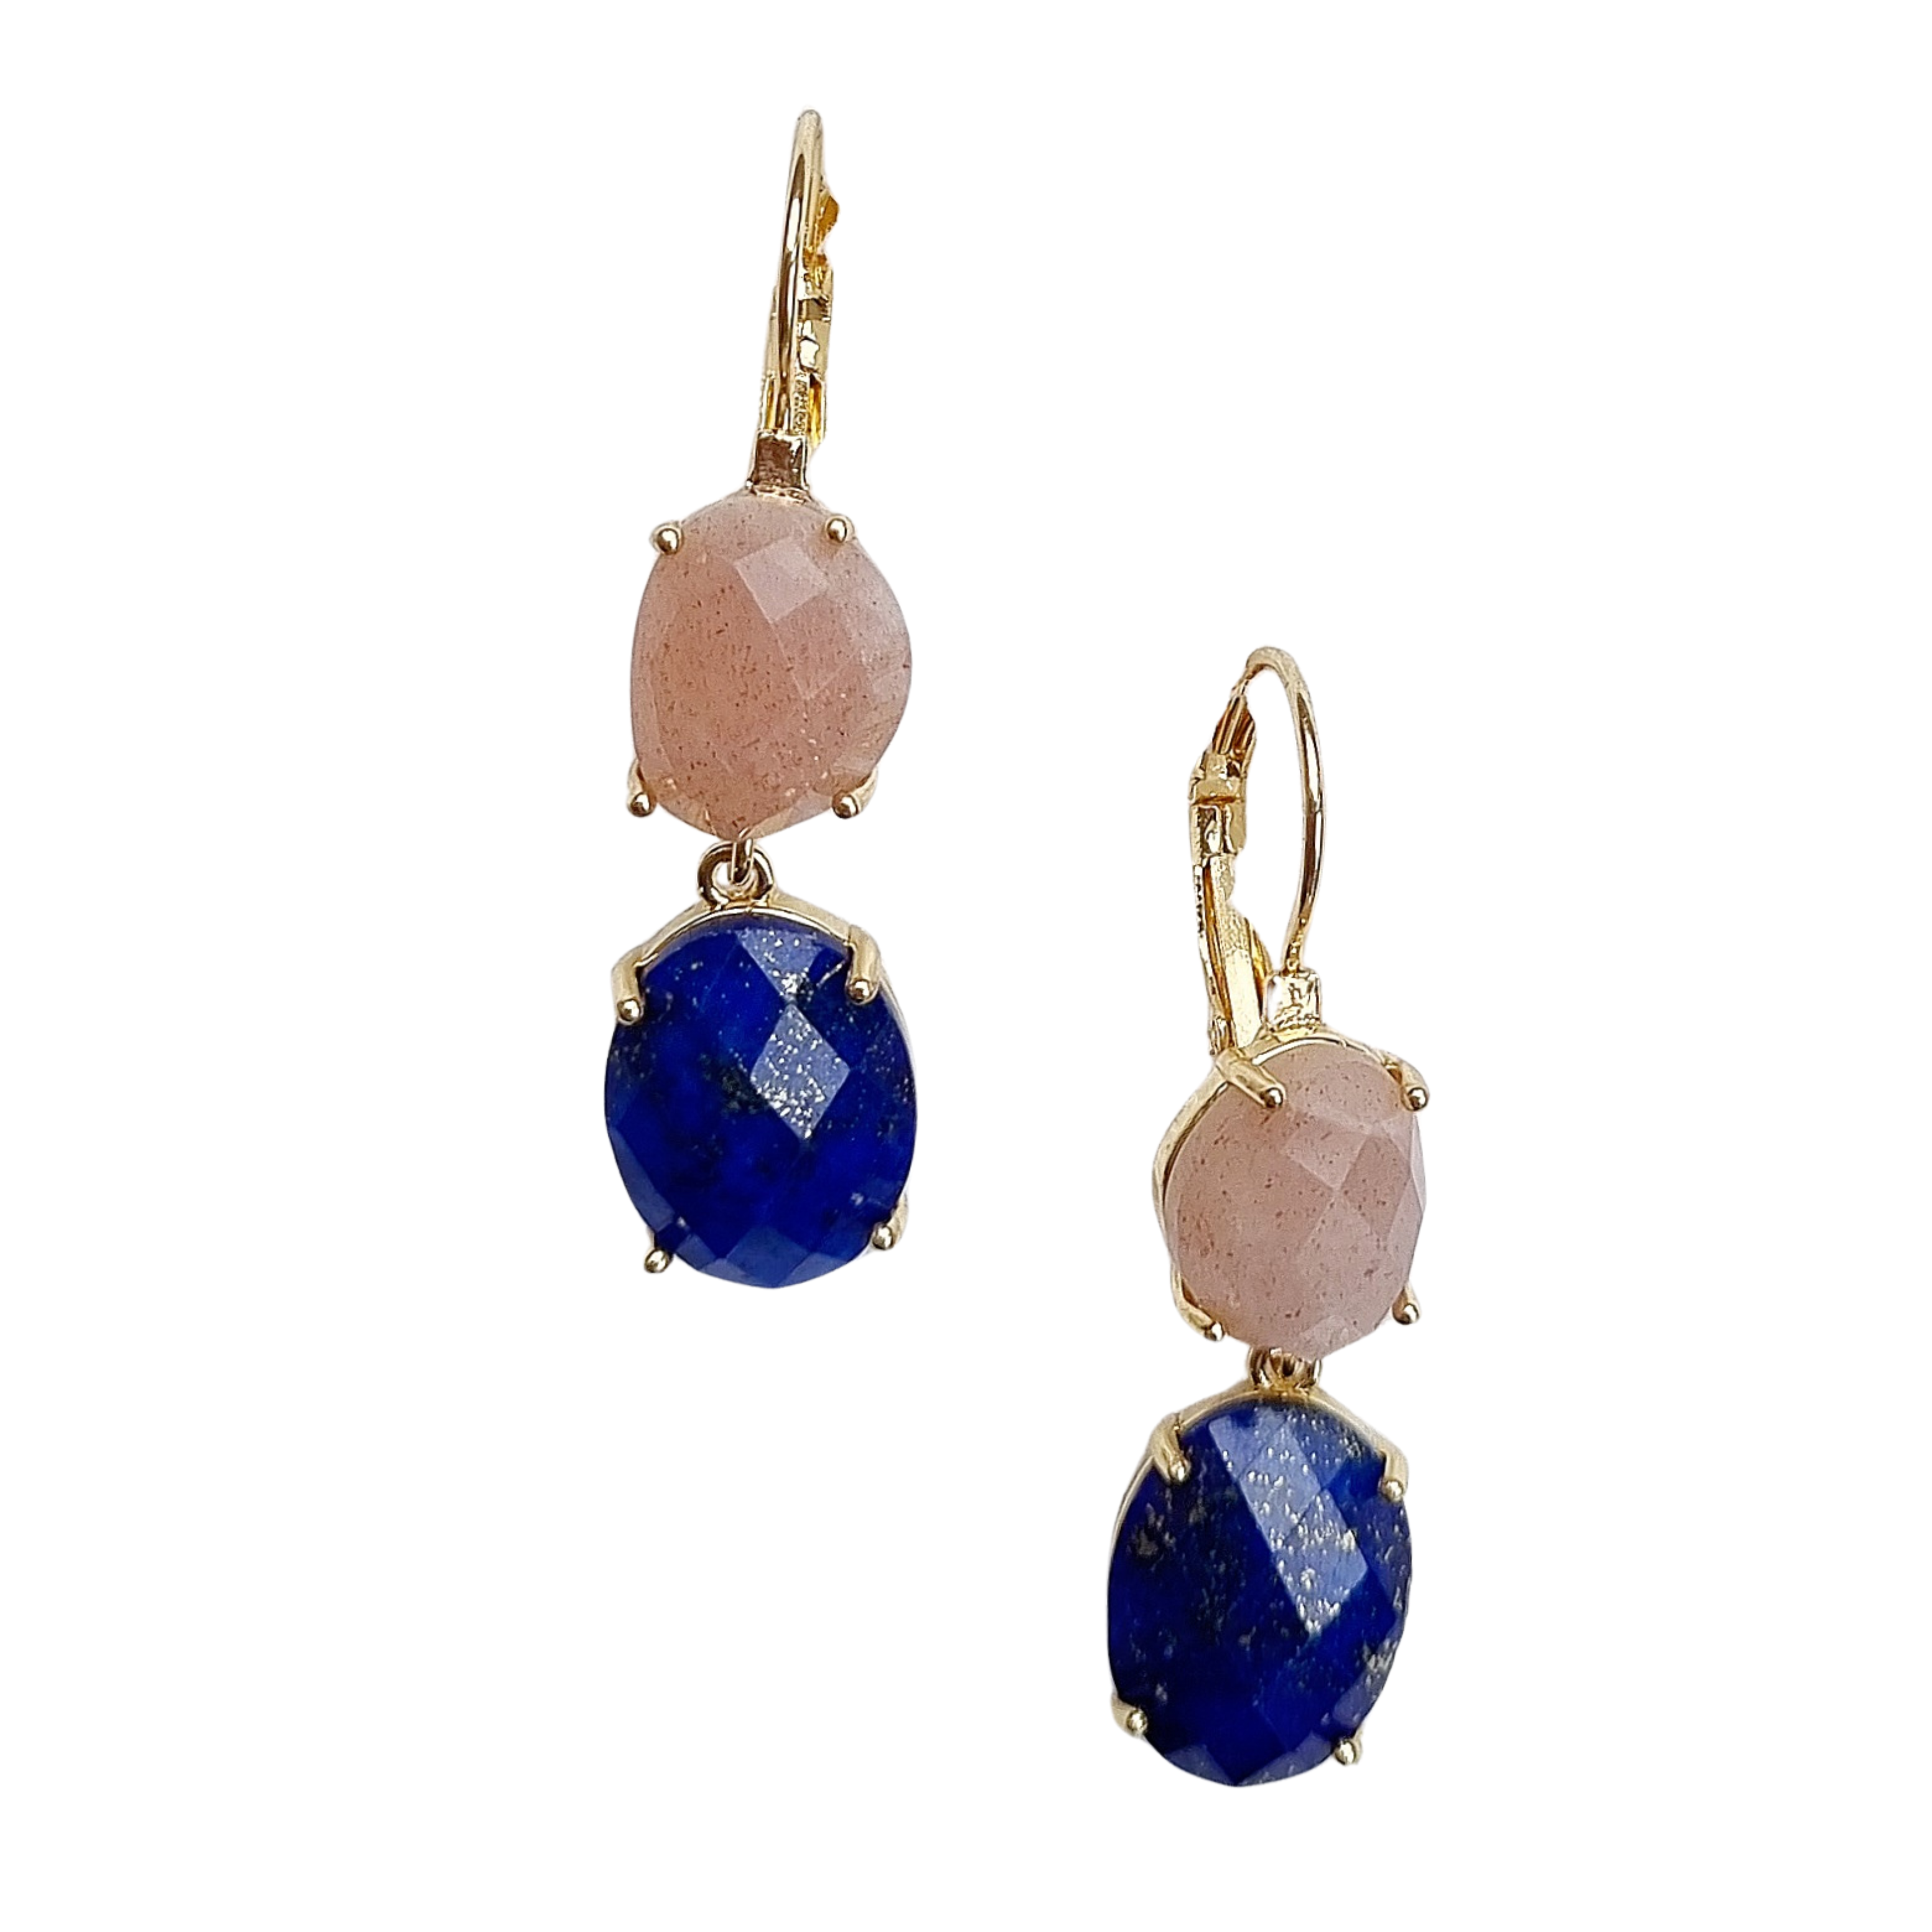 Double Gemstone Natural Stone Earring EH999PINKBLUE